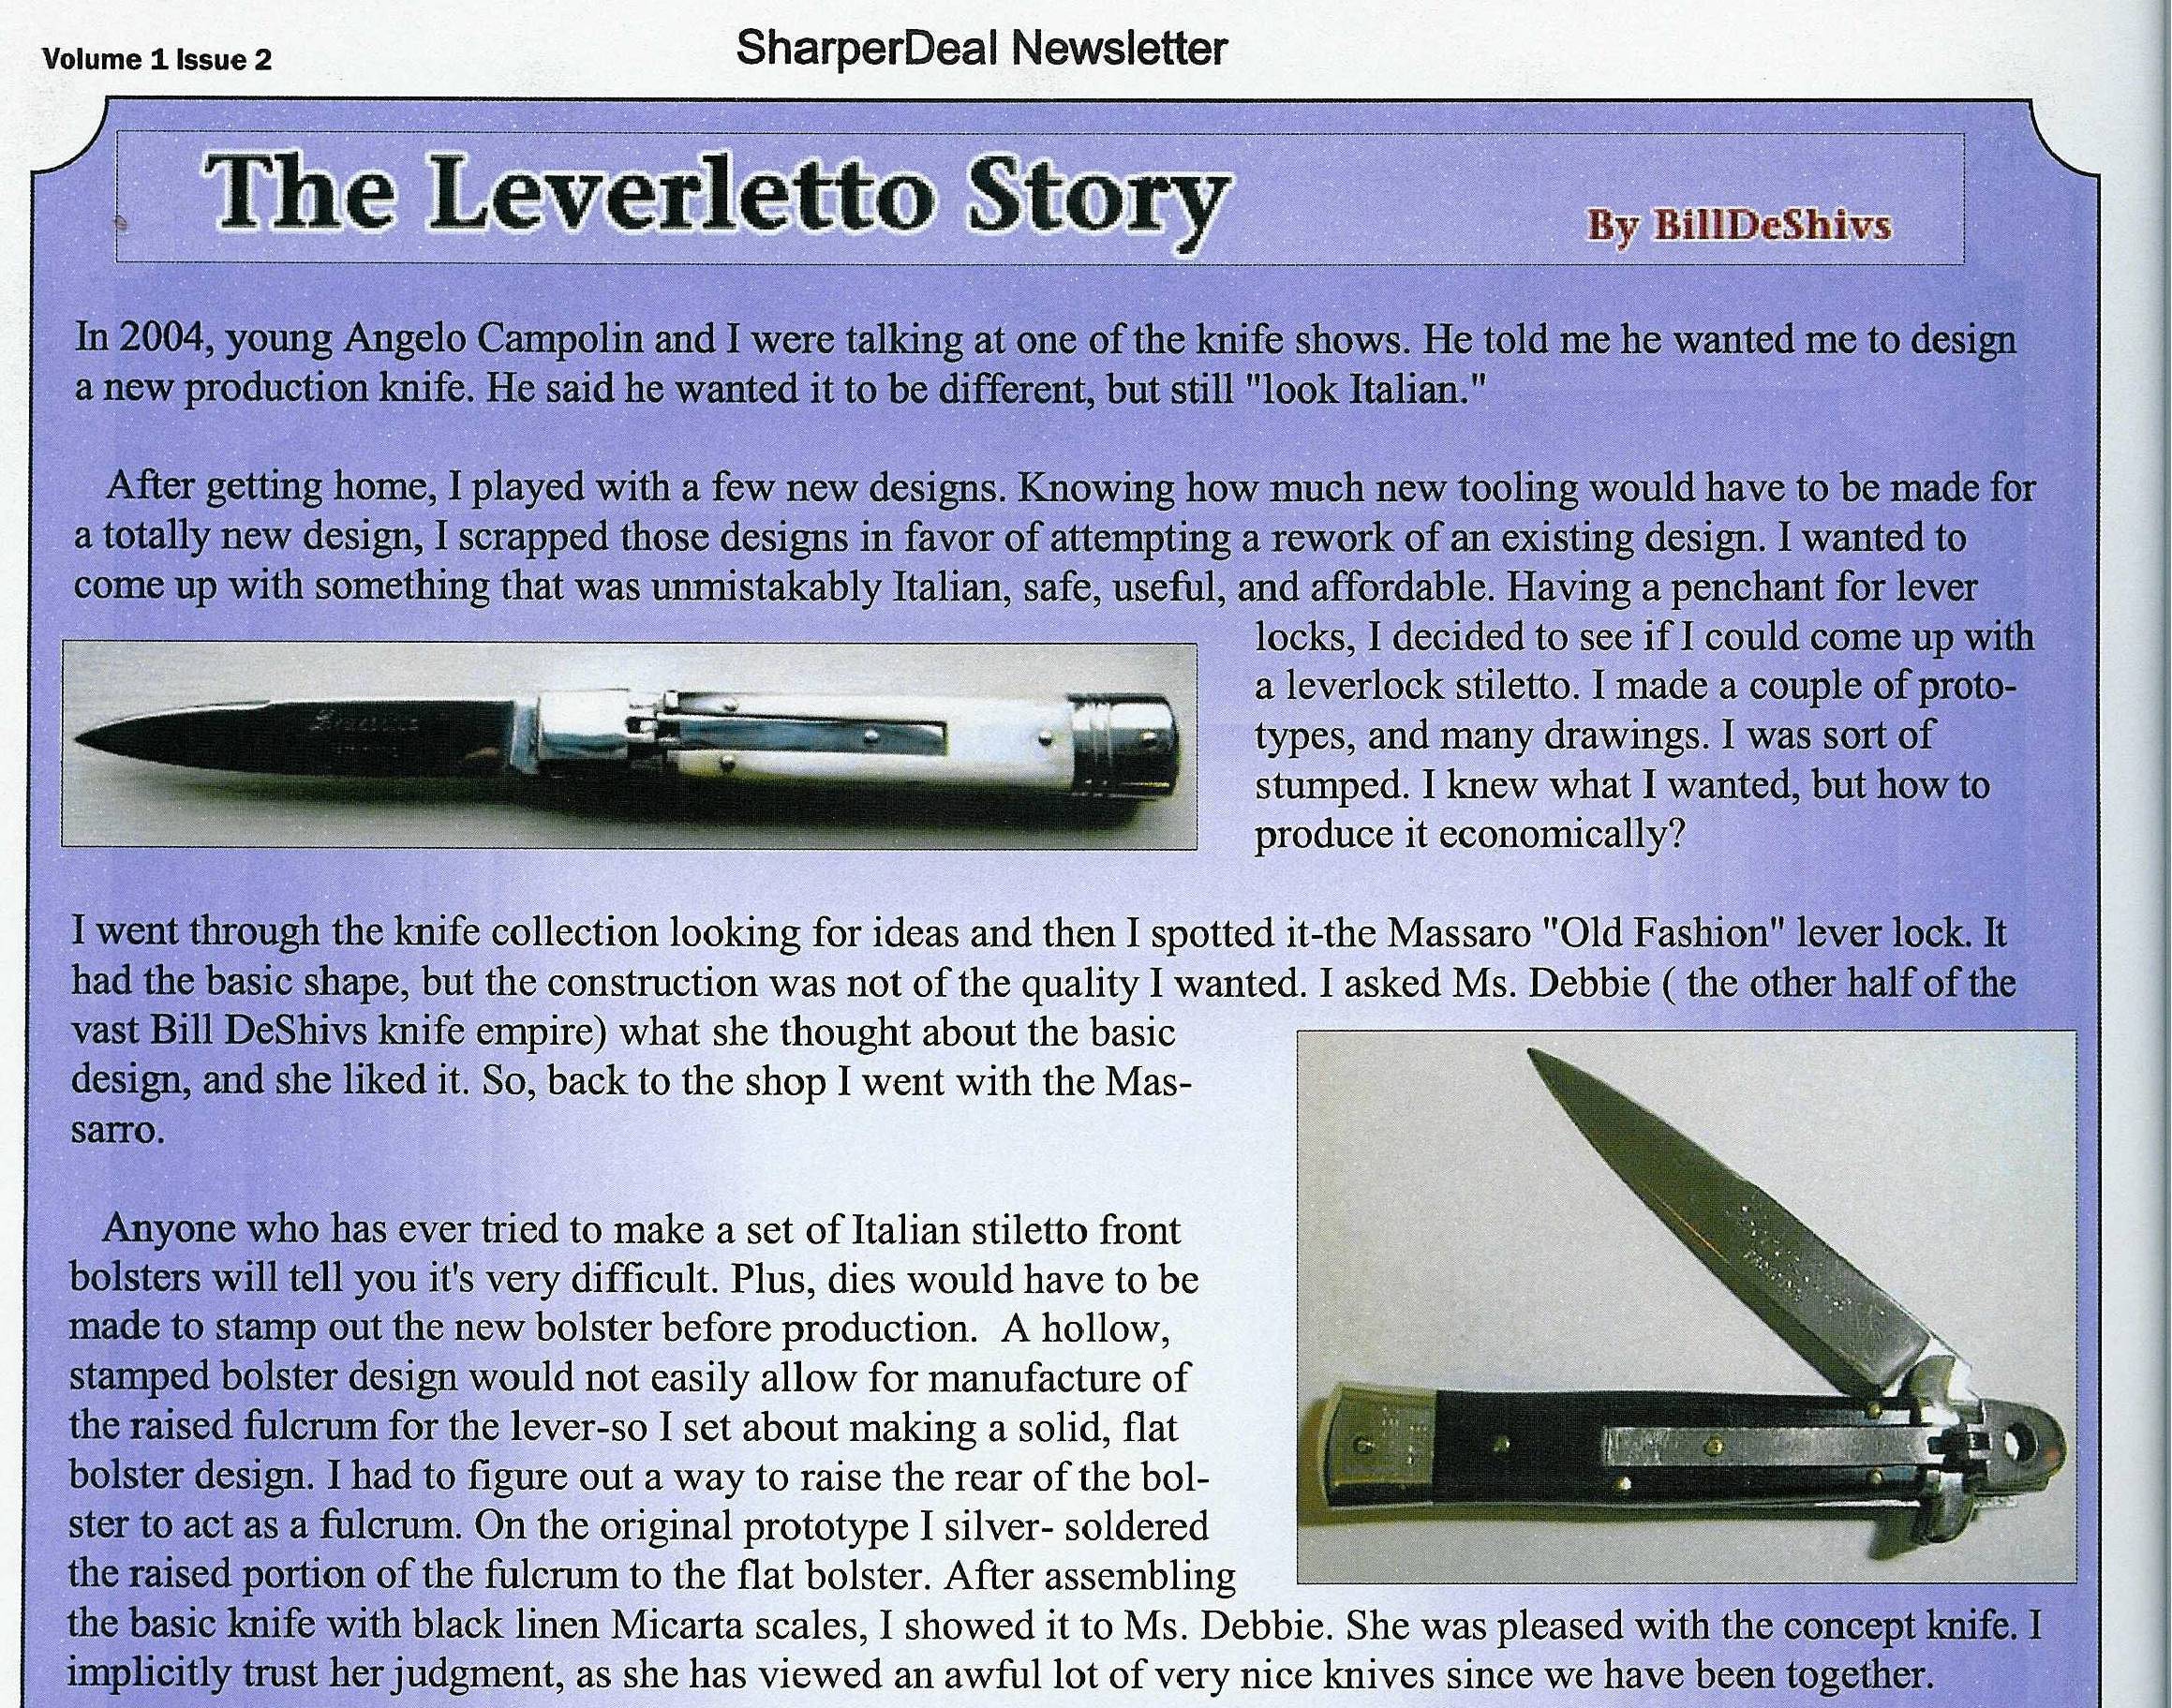 The Leverletto Story